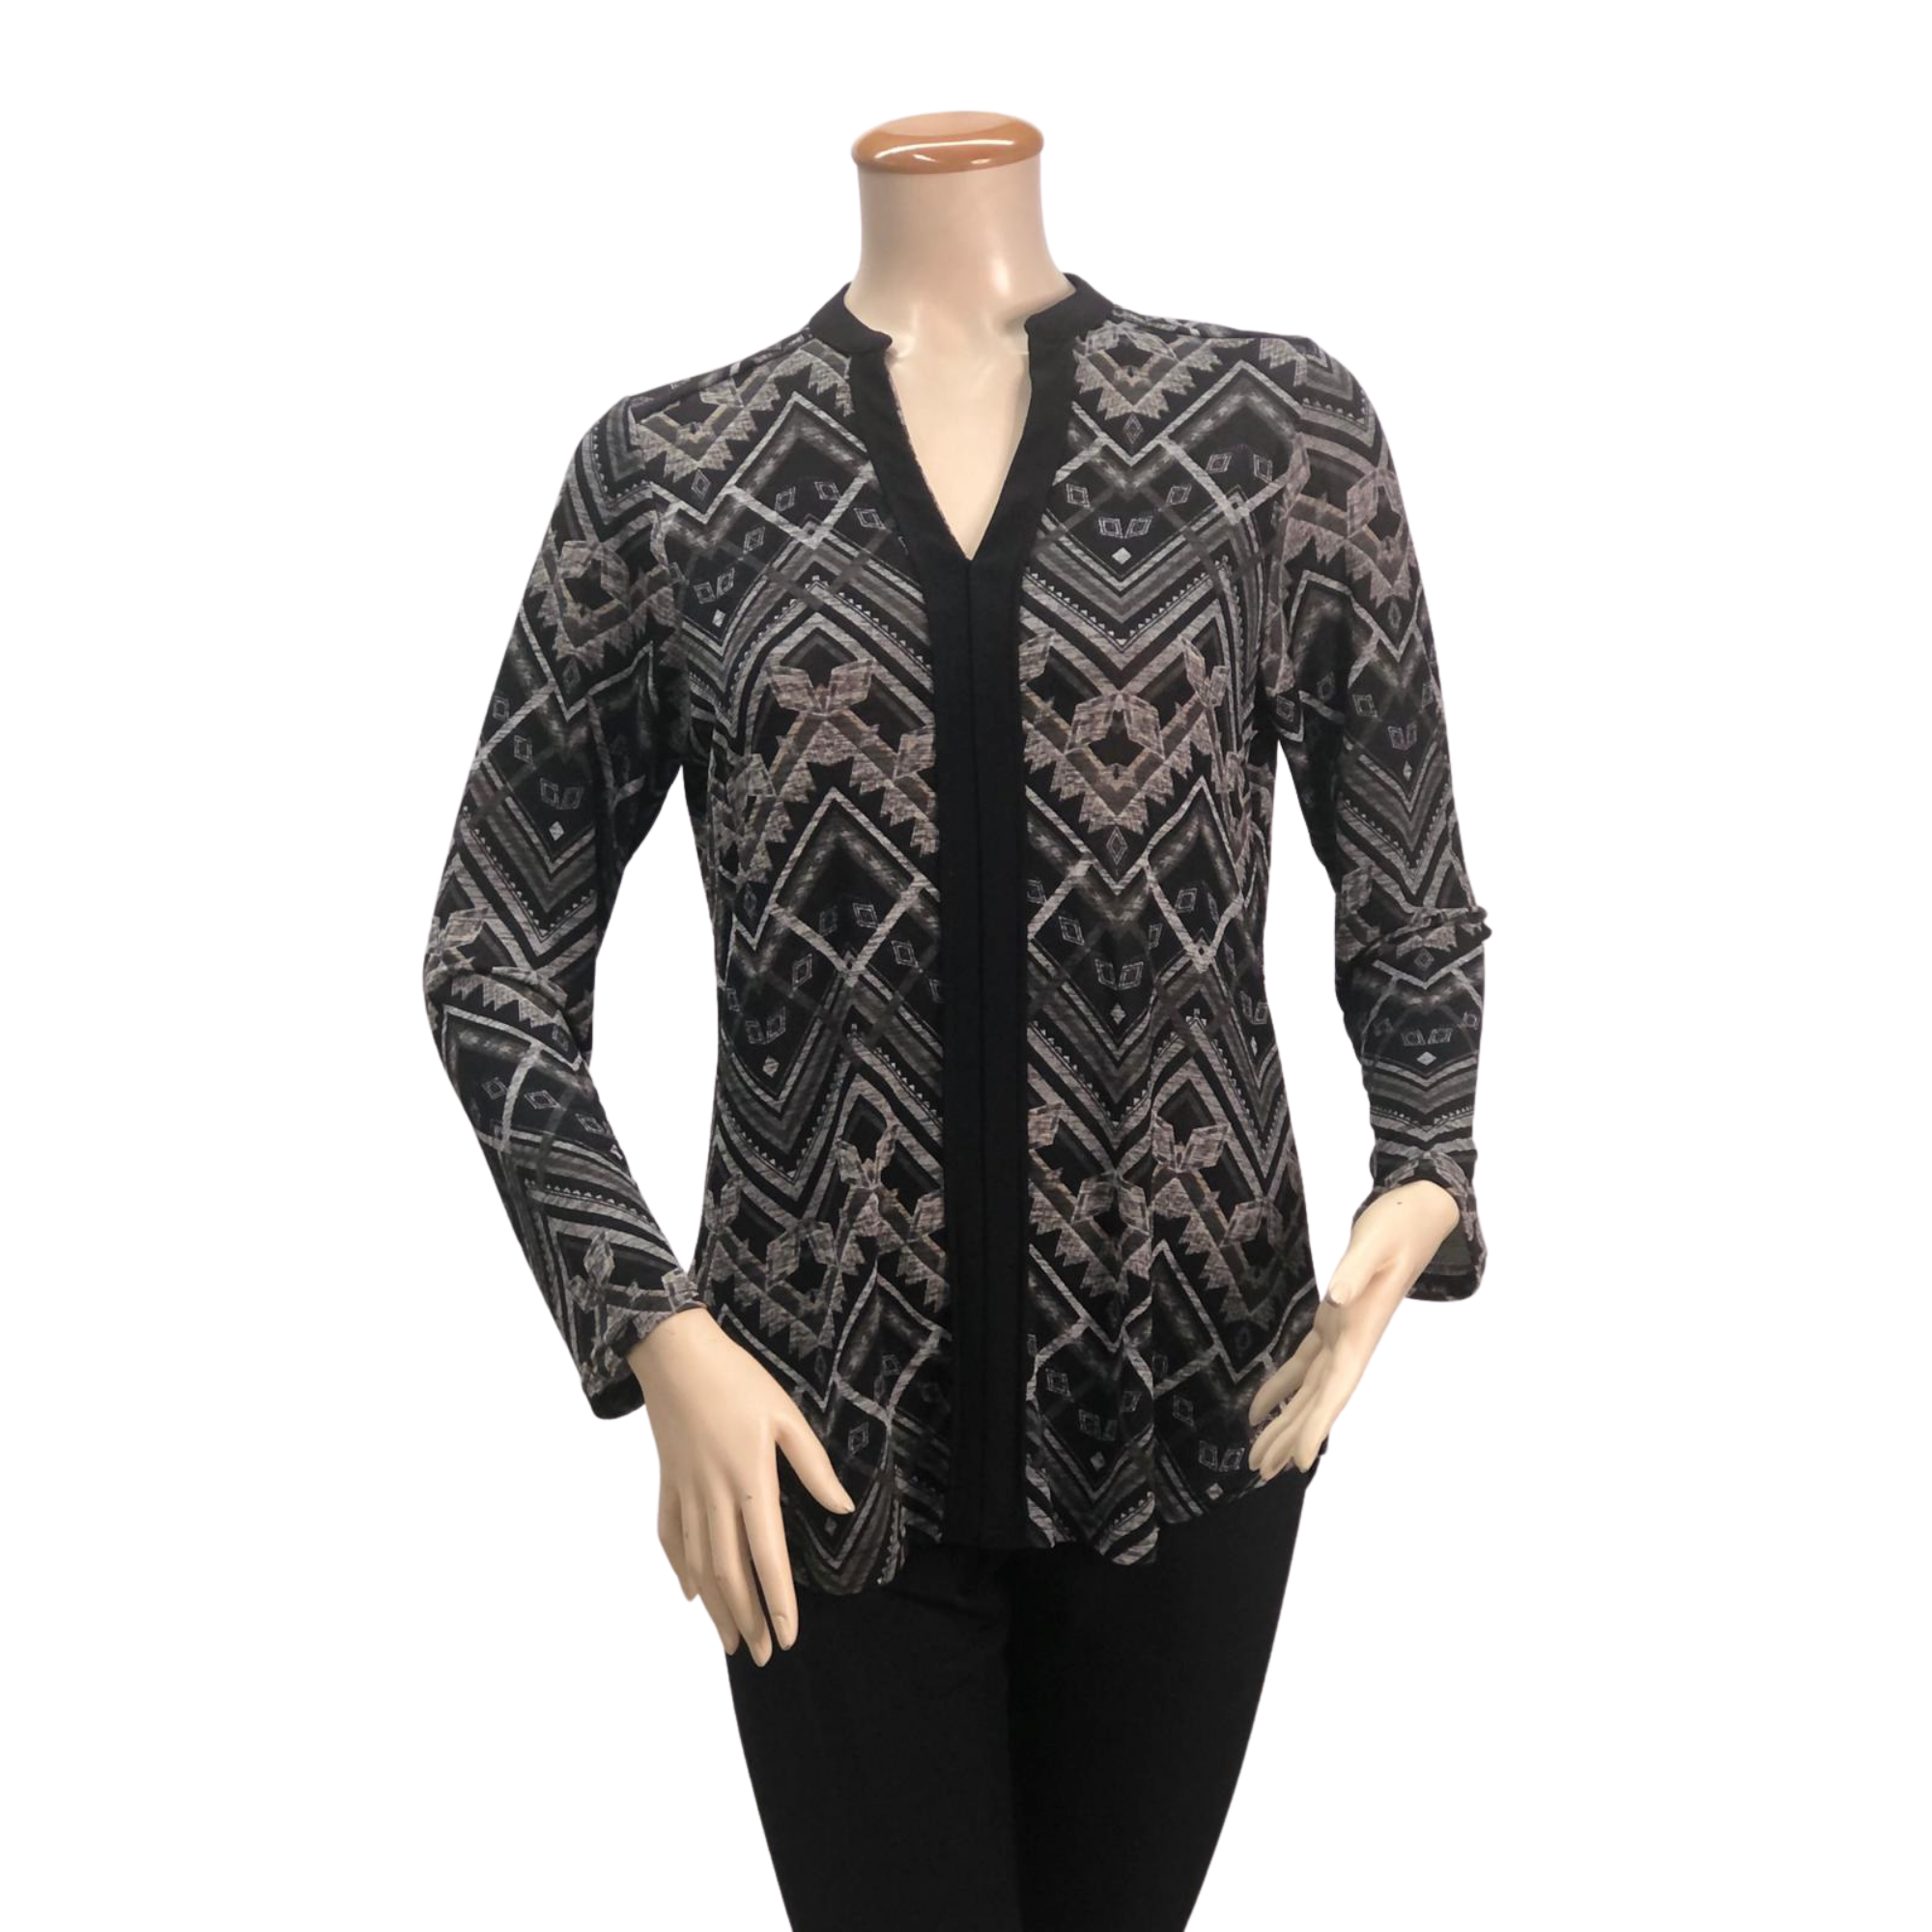 T531 - LONG SLEEVE SPLIT-NECK PULLOVER TOP WITH PLACKET TRIM - Fashque